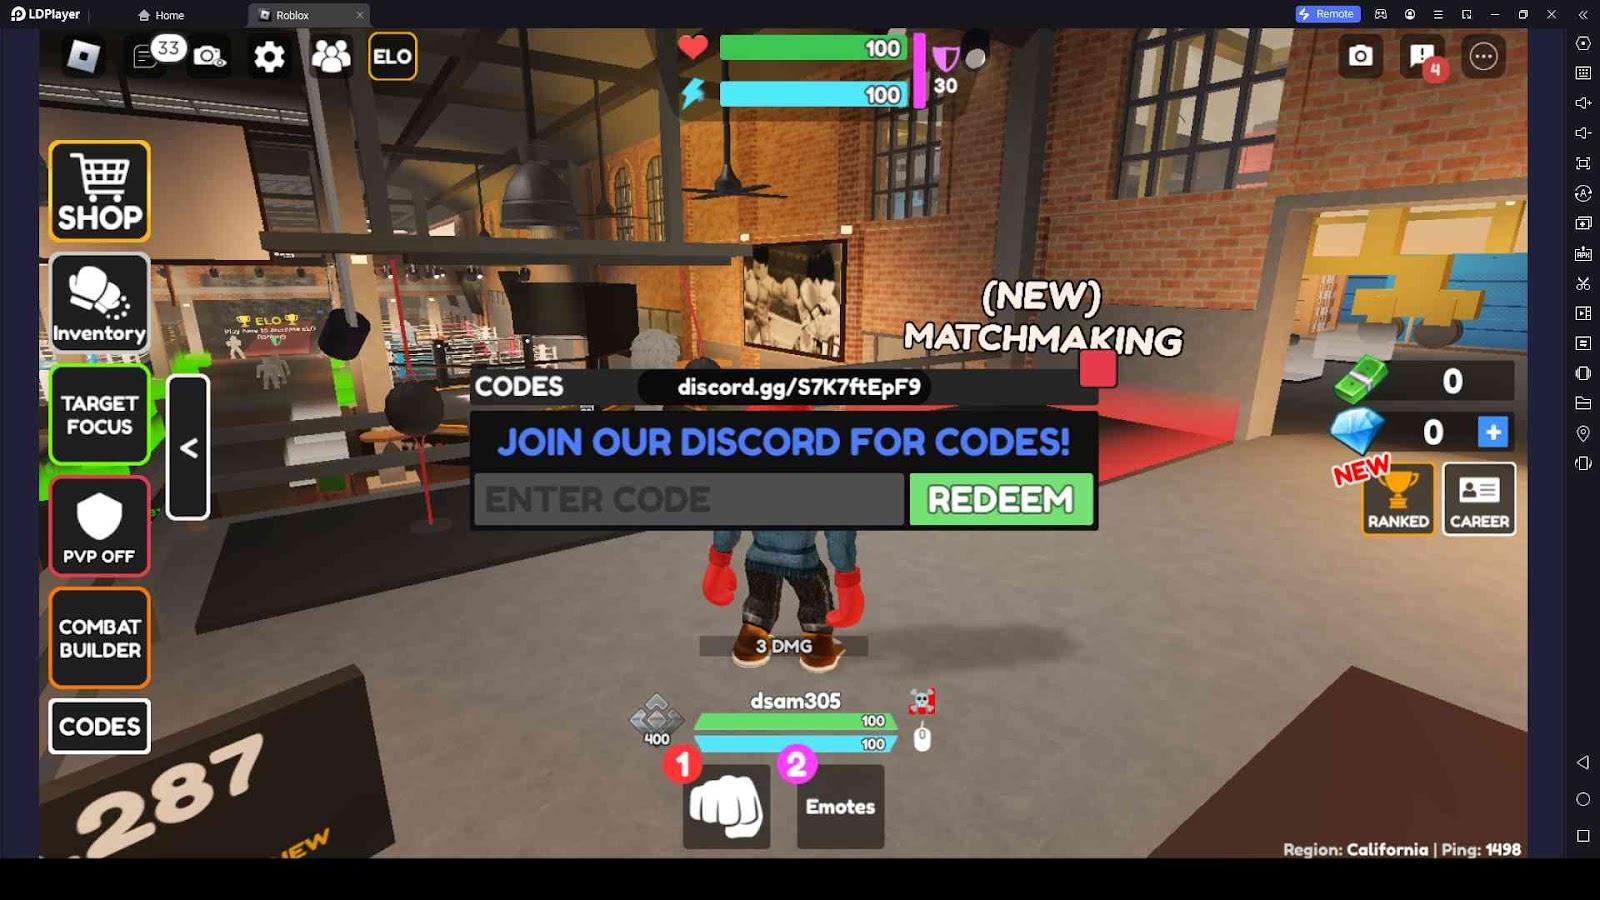 All active Boxing Beta codes to redeem free cash